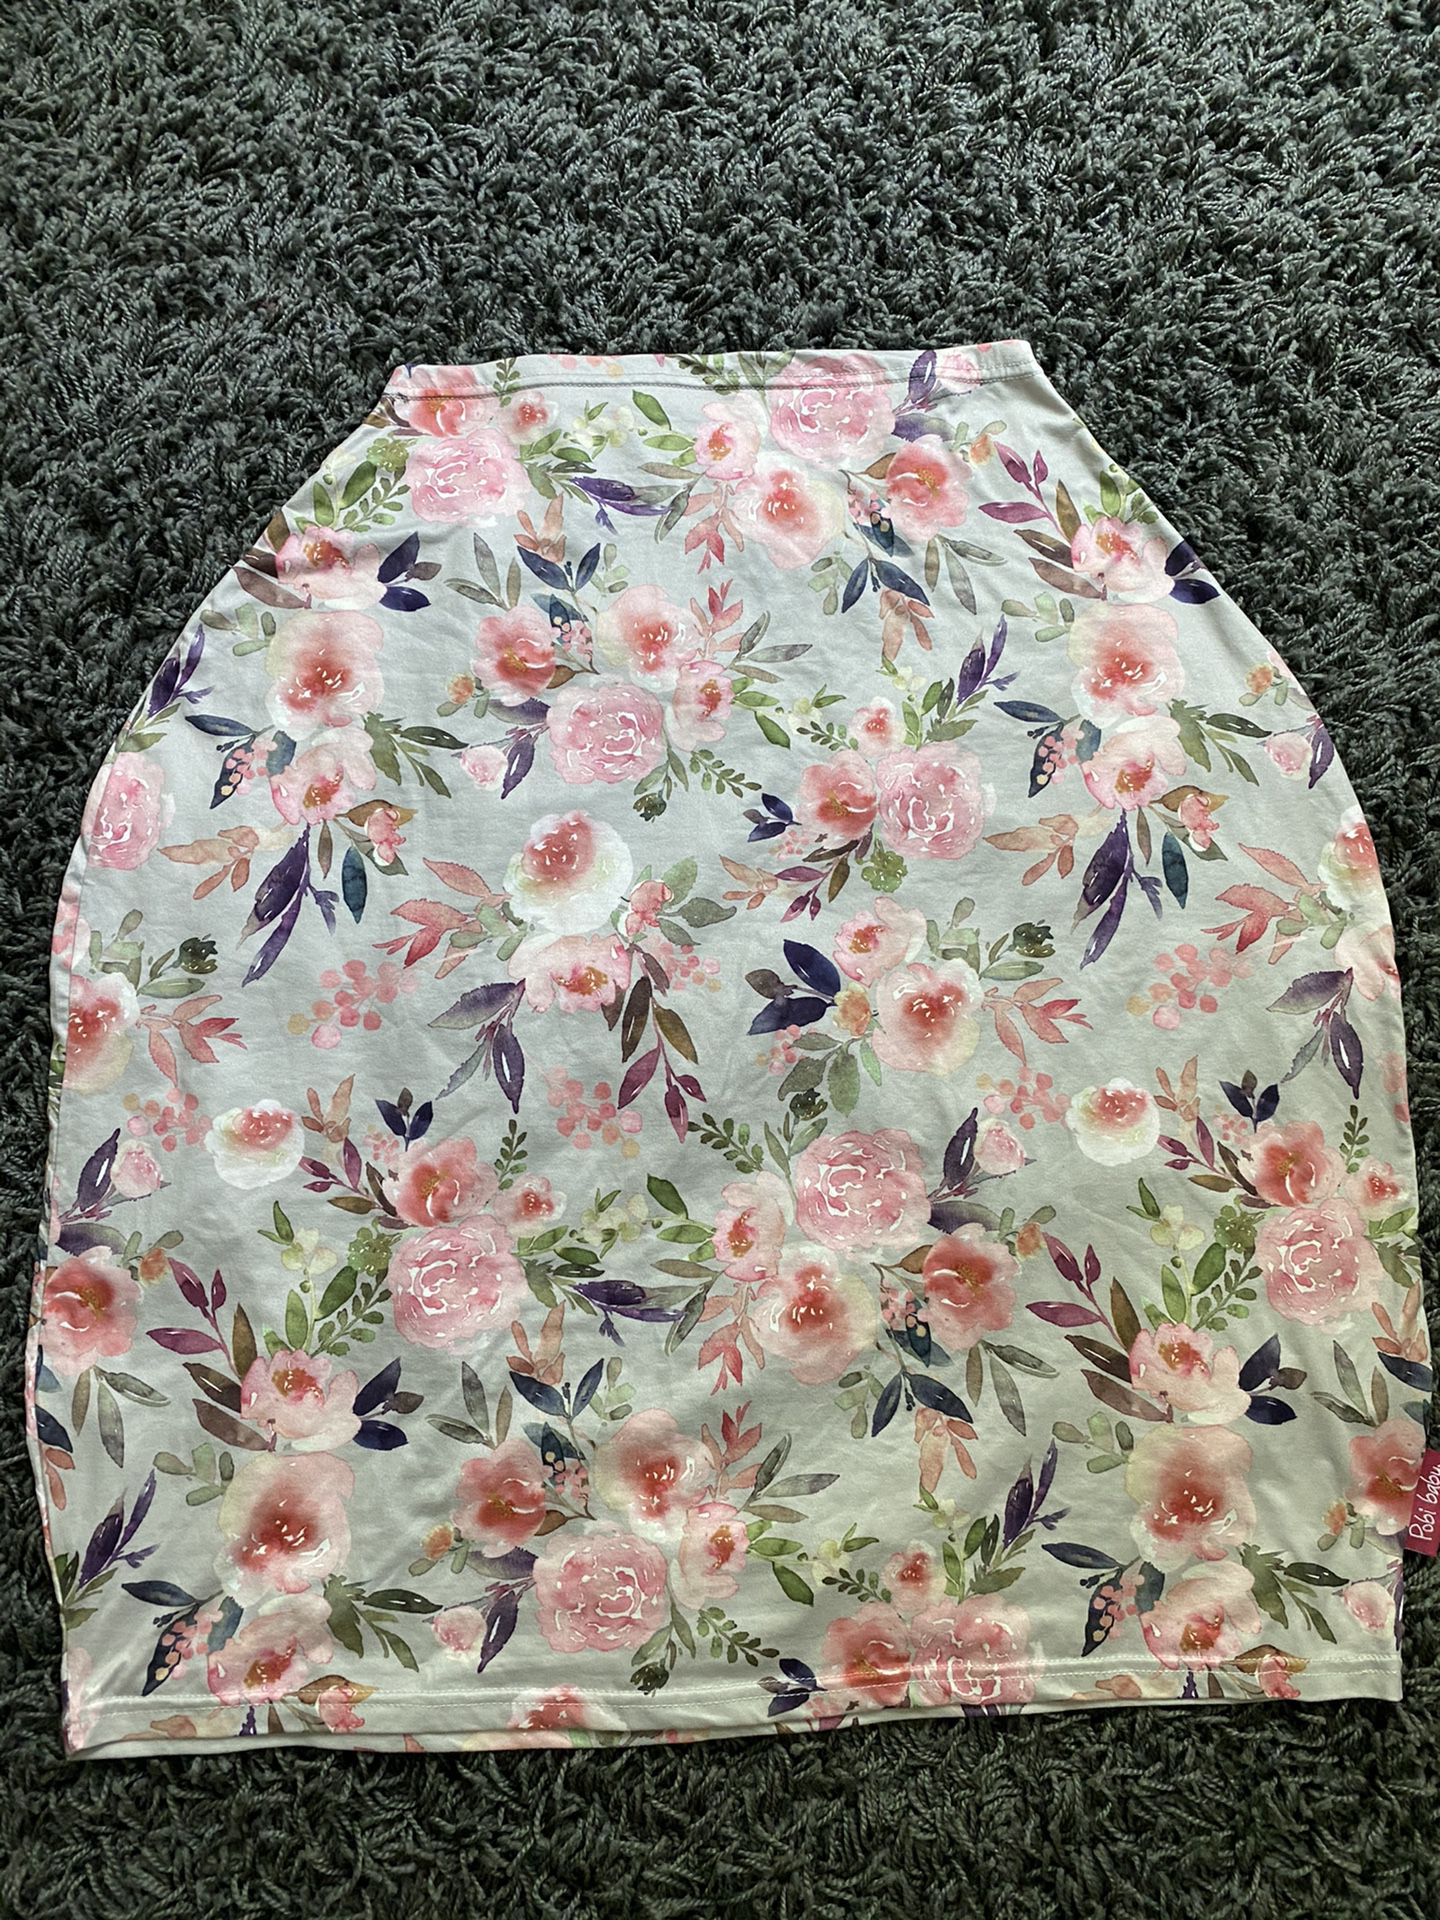 Car seat canopy cover and nursing cover - floral baby girl